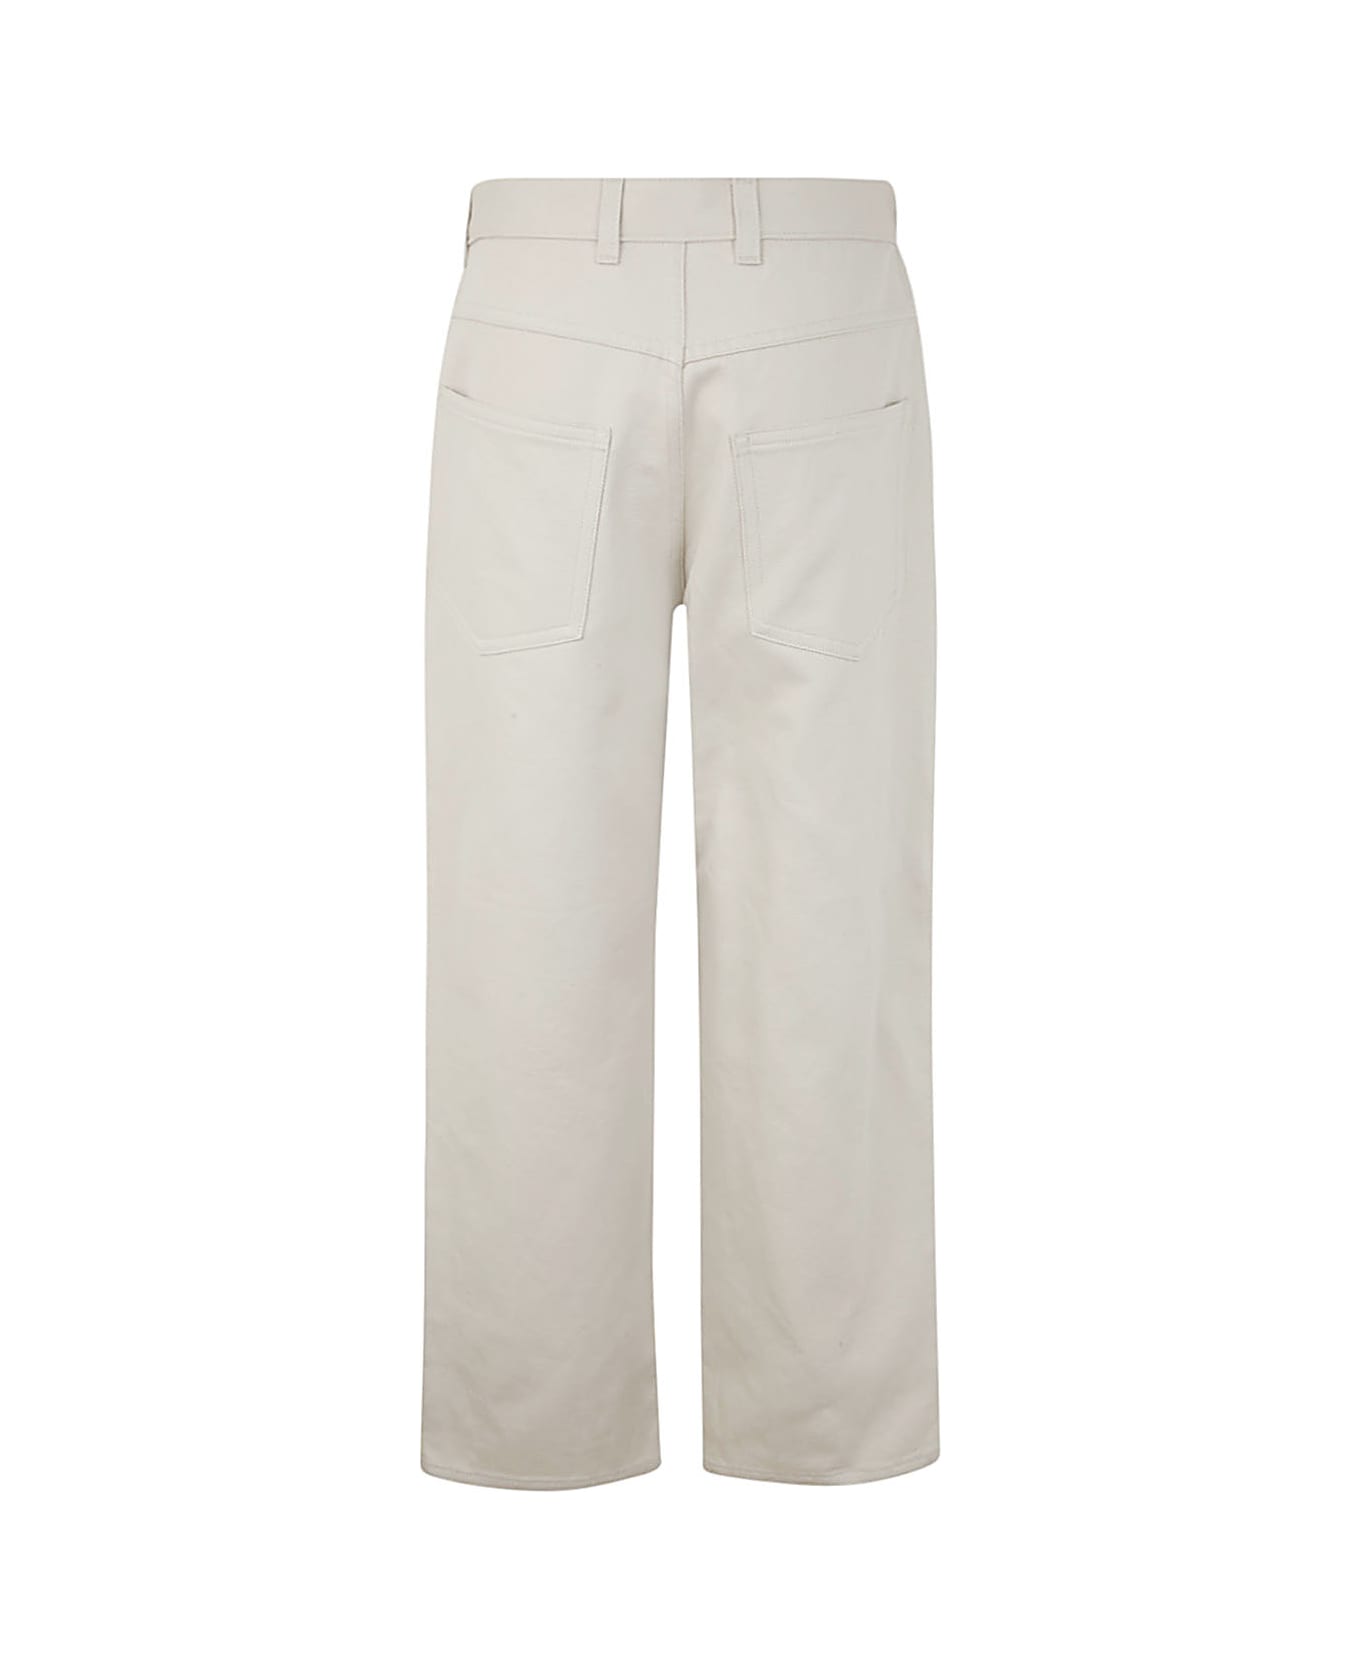 Sofie d'Hoore 5-pockets Jeans - Pearl